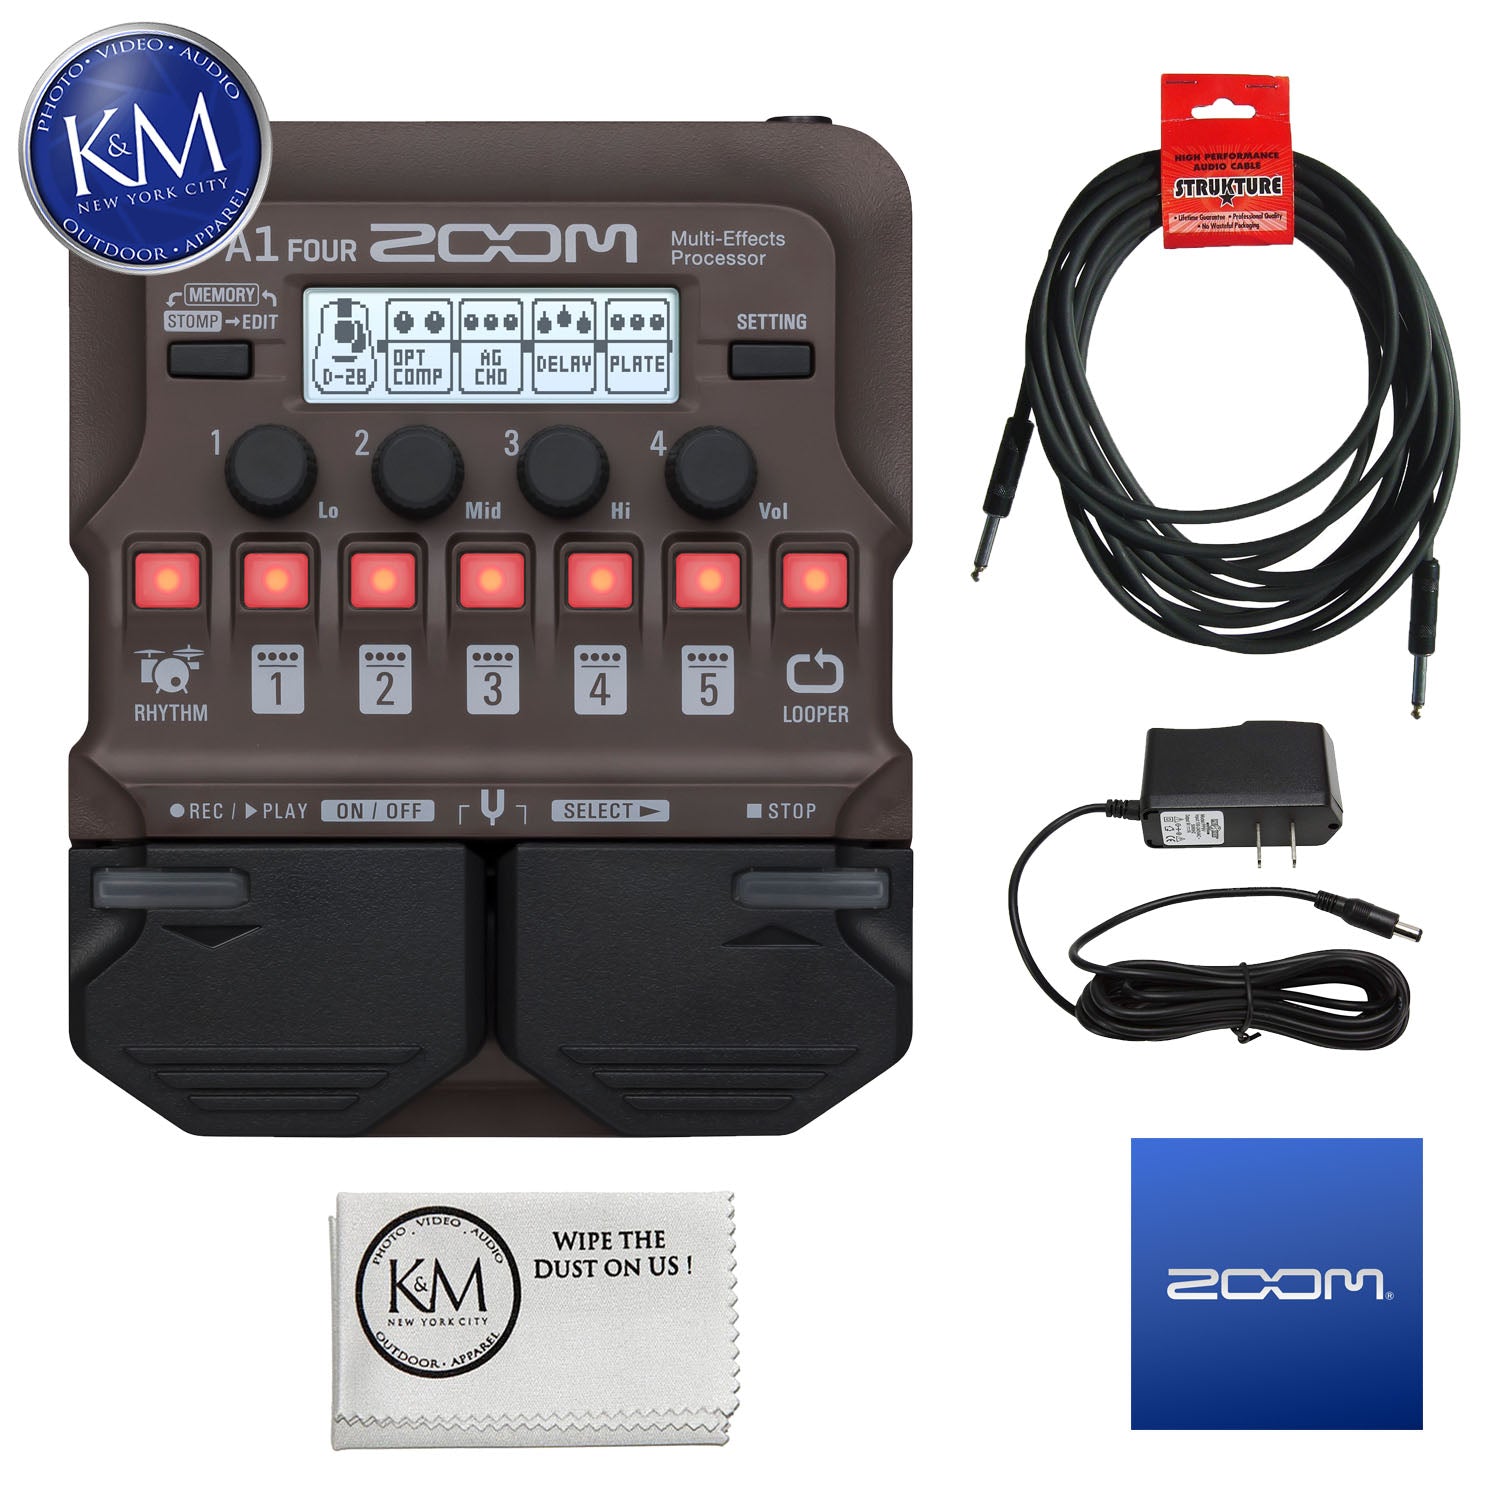 Zoom A1 FOUR Multi-Effects Processor with Essential Bundle | K&M